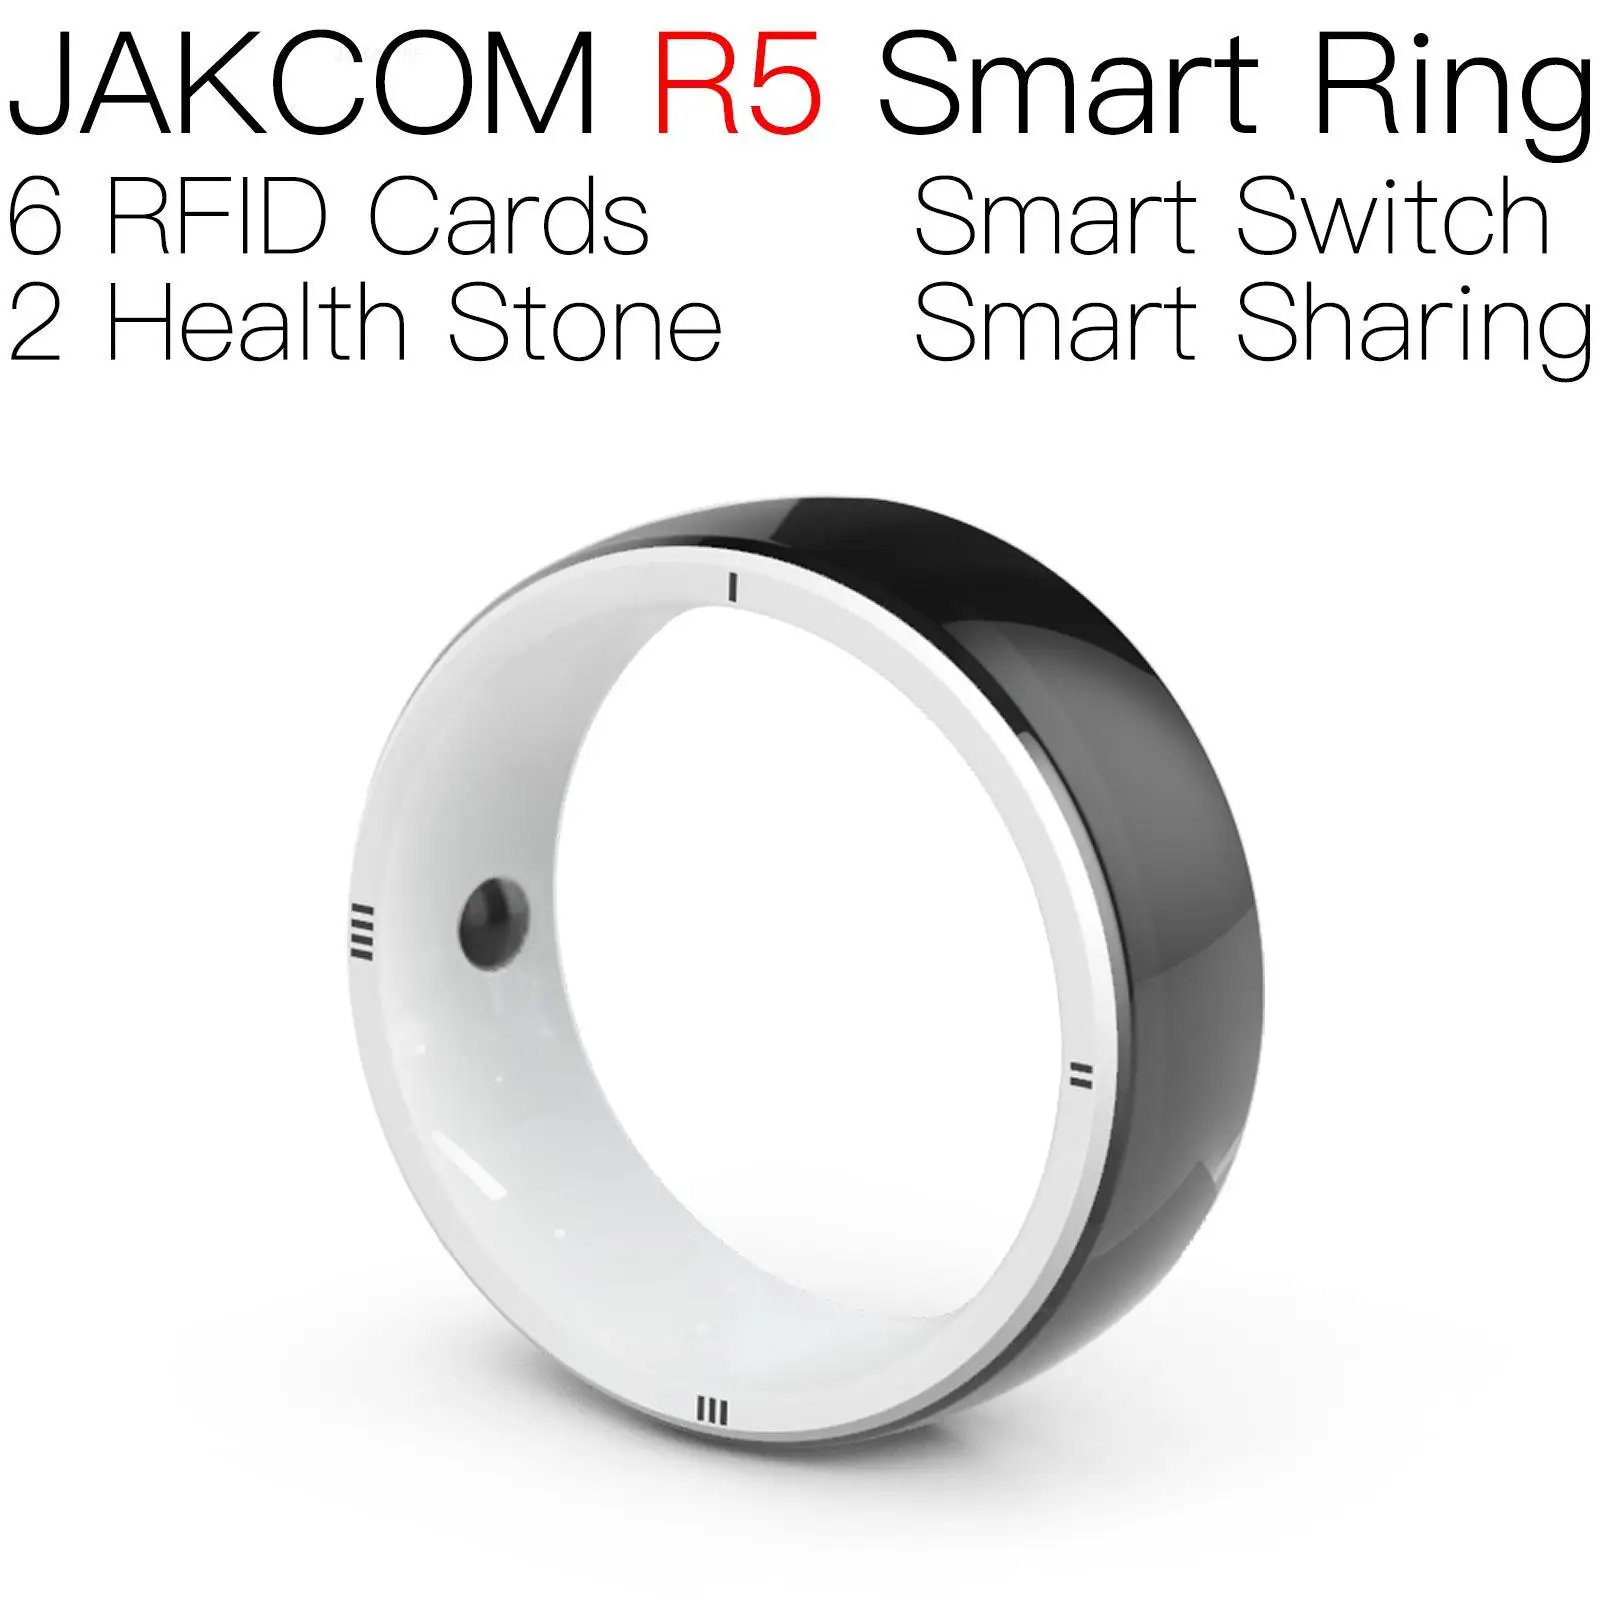 

JAKCOM R5 Smart Ring Super value than lot carte programmable nfc tags id micrometer proxy key 125 mhz chip to track pet tag